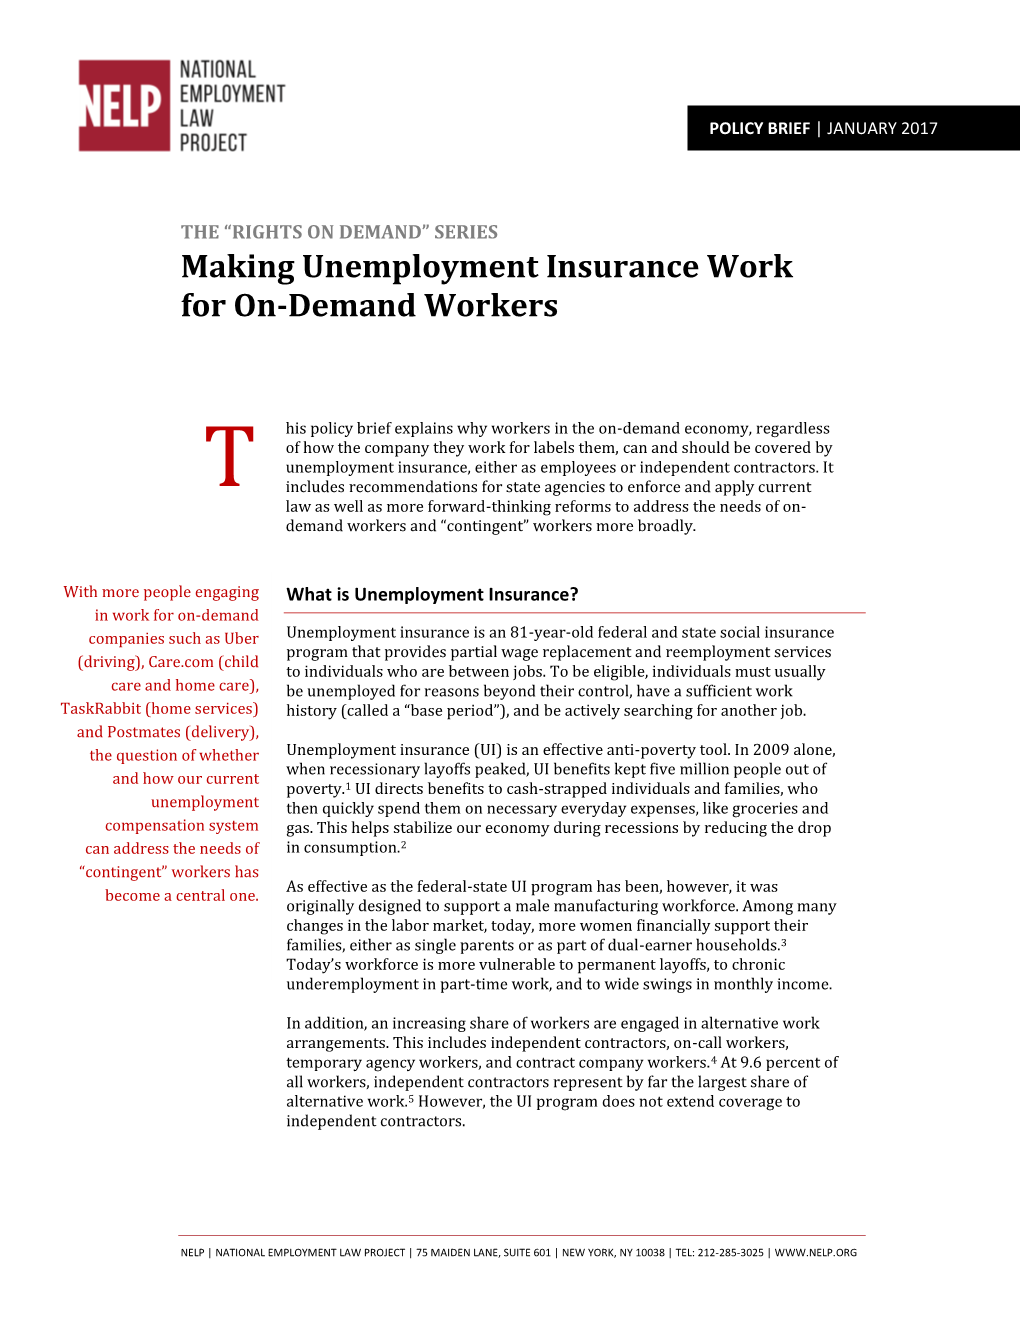 Making Unemployment Insurance Work for On-Demand Workers